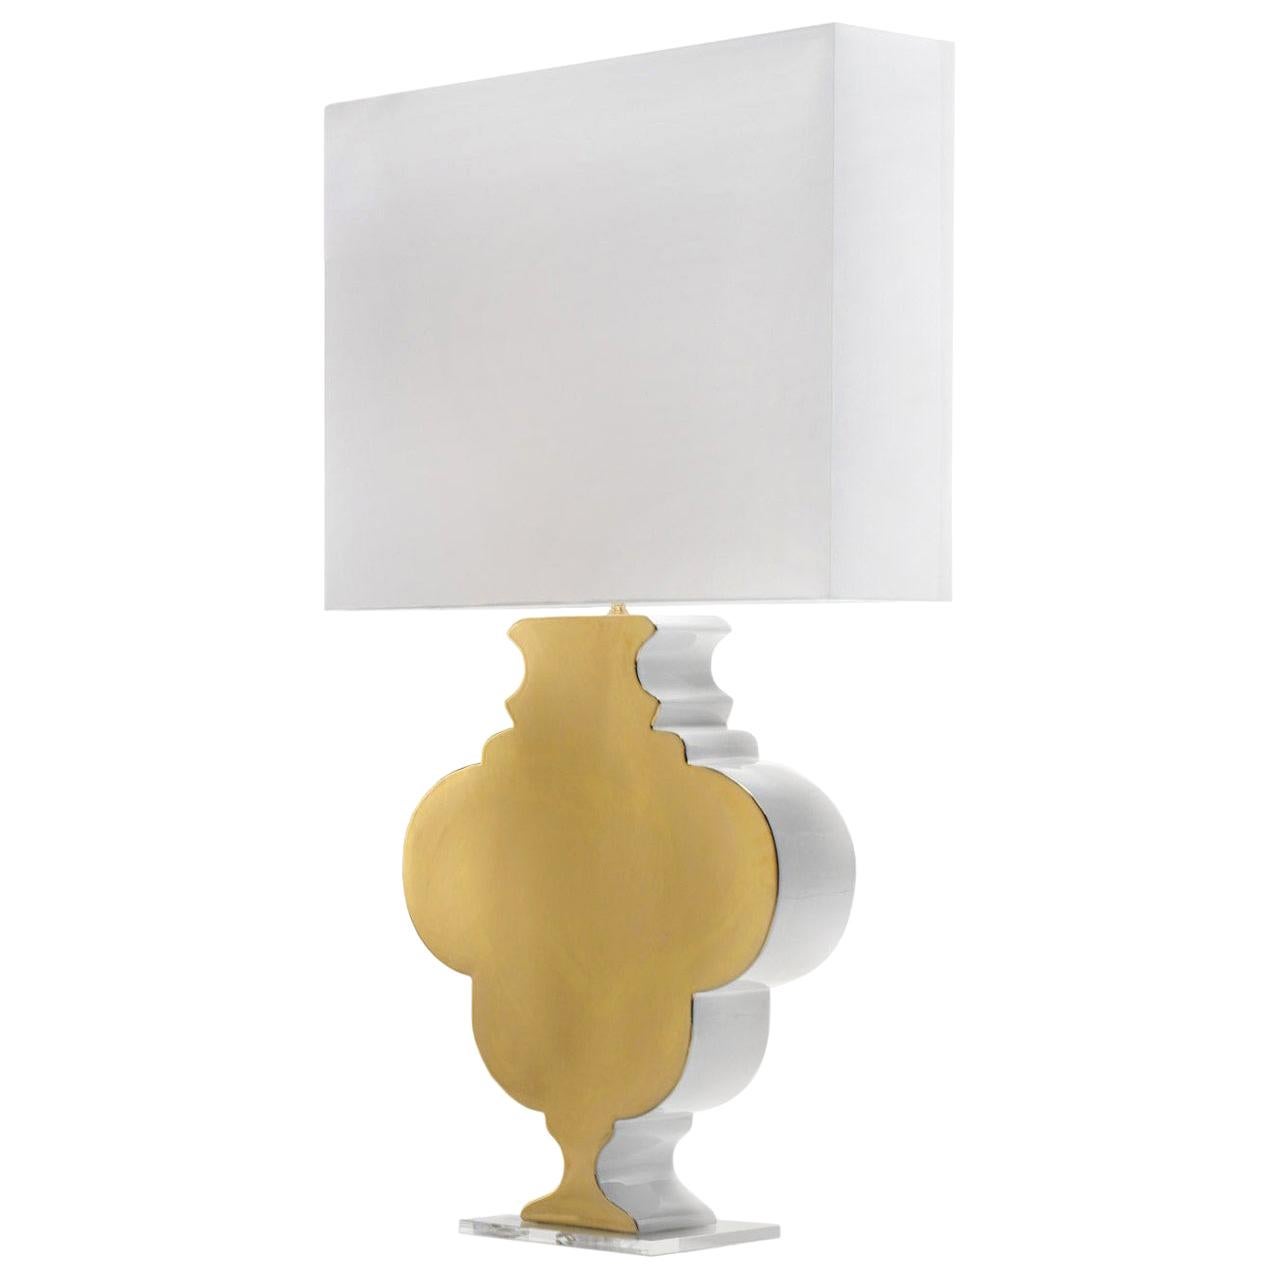 Ceramic Lamp "GRACE 50" Handcrafted in White and 24-Karat Gold by Gabriella B.